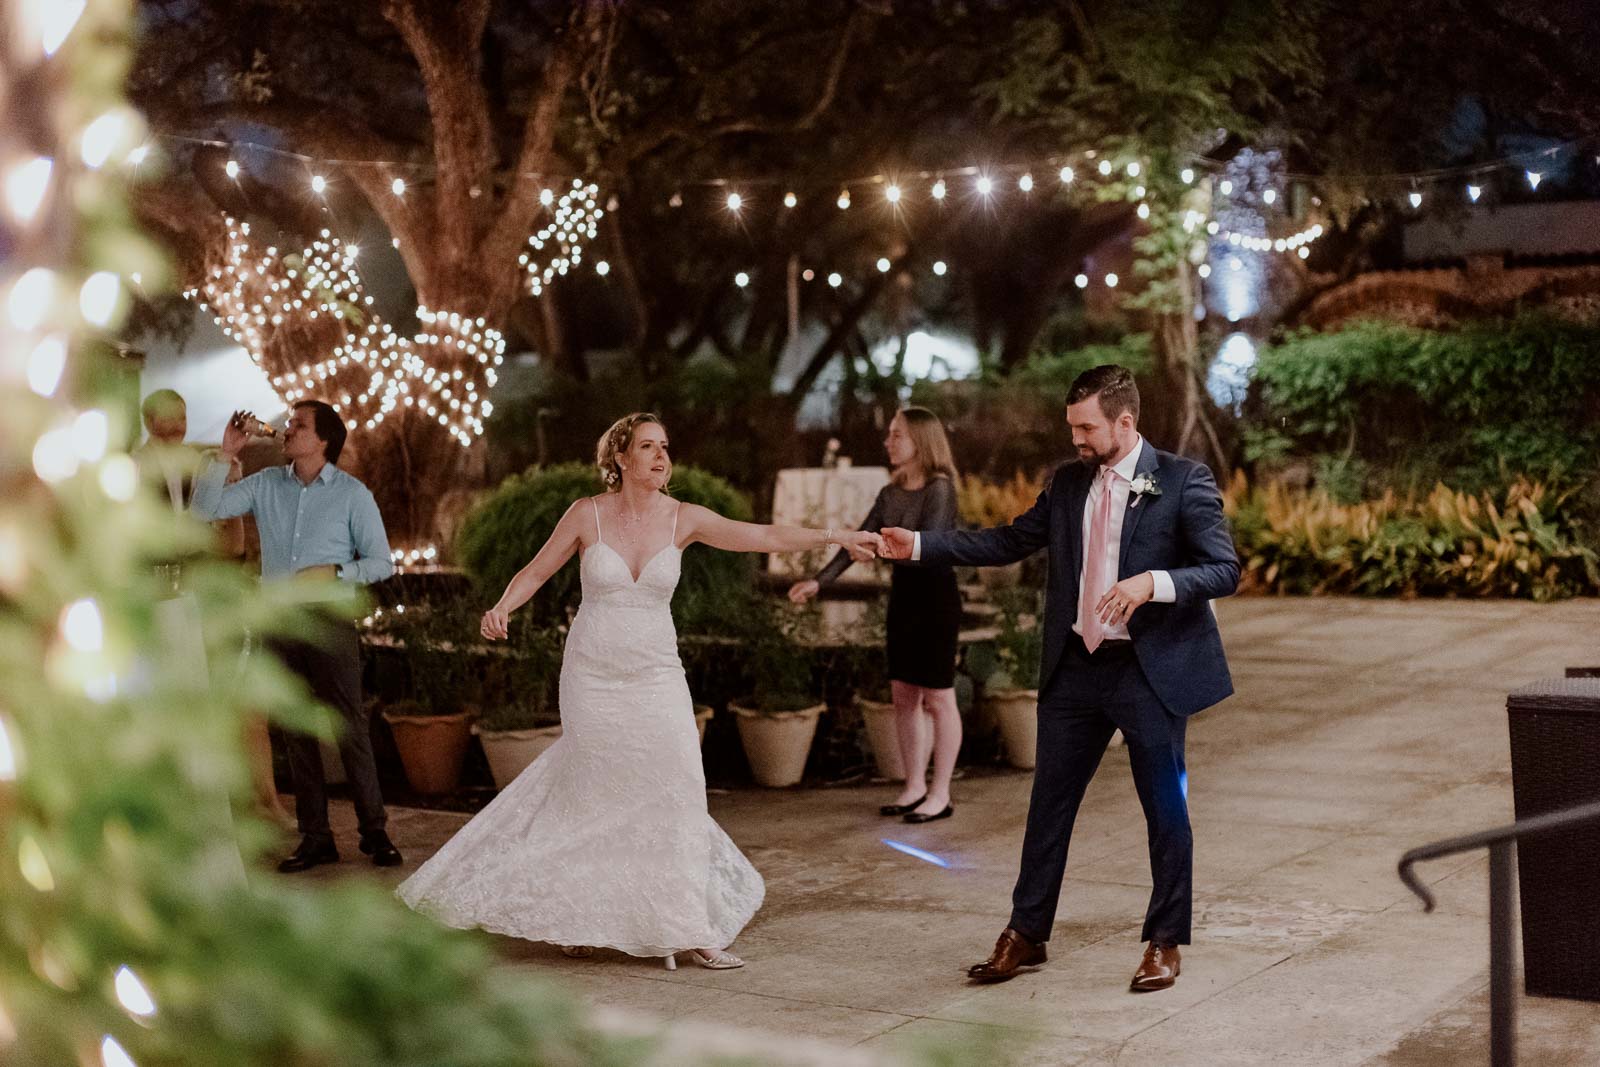 A couple dance and spin the bride on the outdoor wedding reception at the veranda